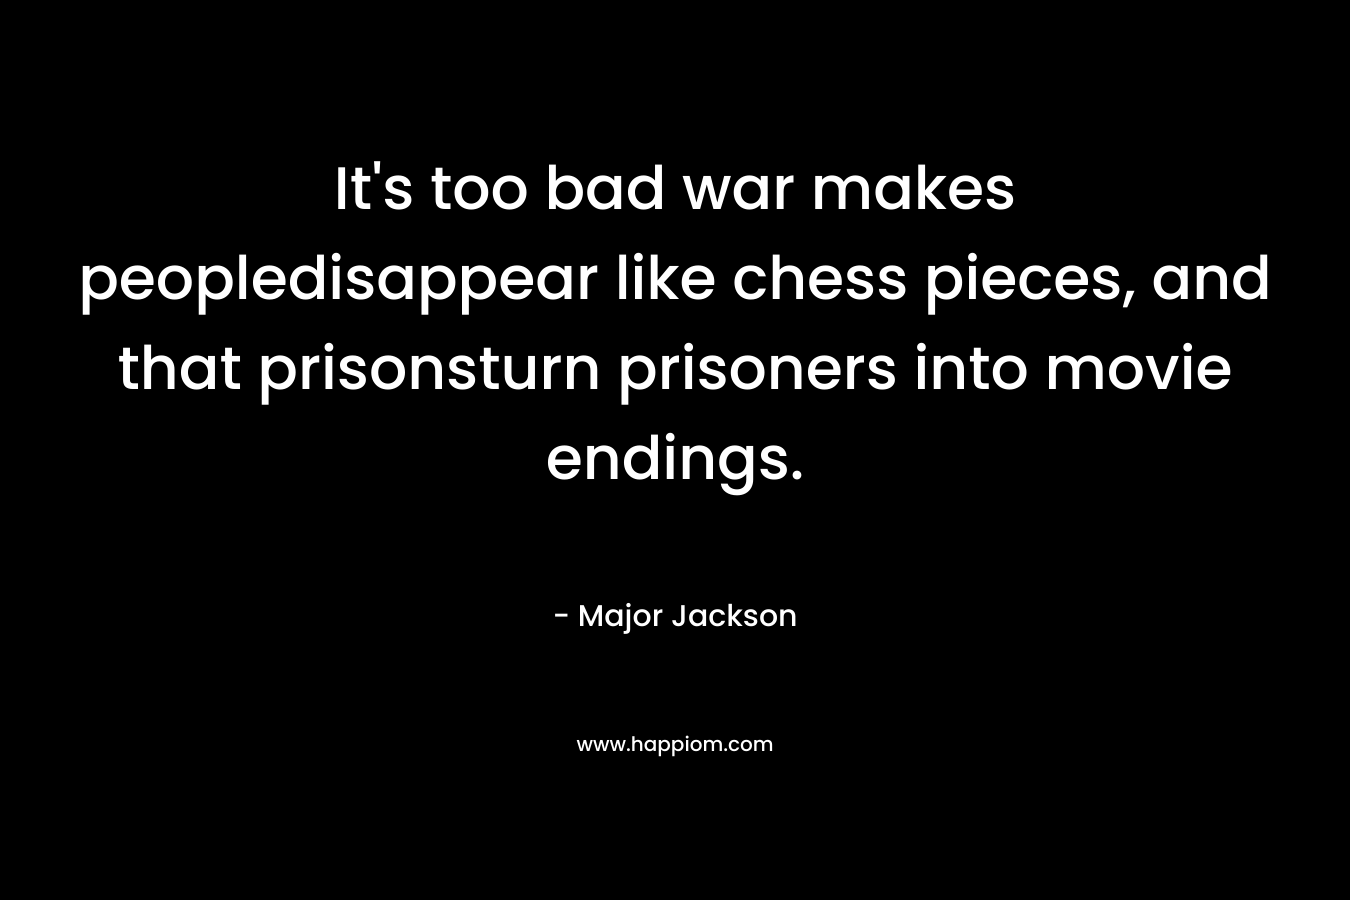 It's too bad war makes peopledisappear like chess pieces, and that prisonsturn prisoners into movie endings.